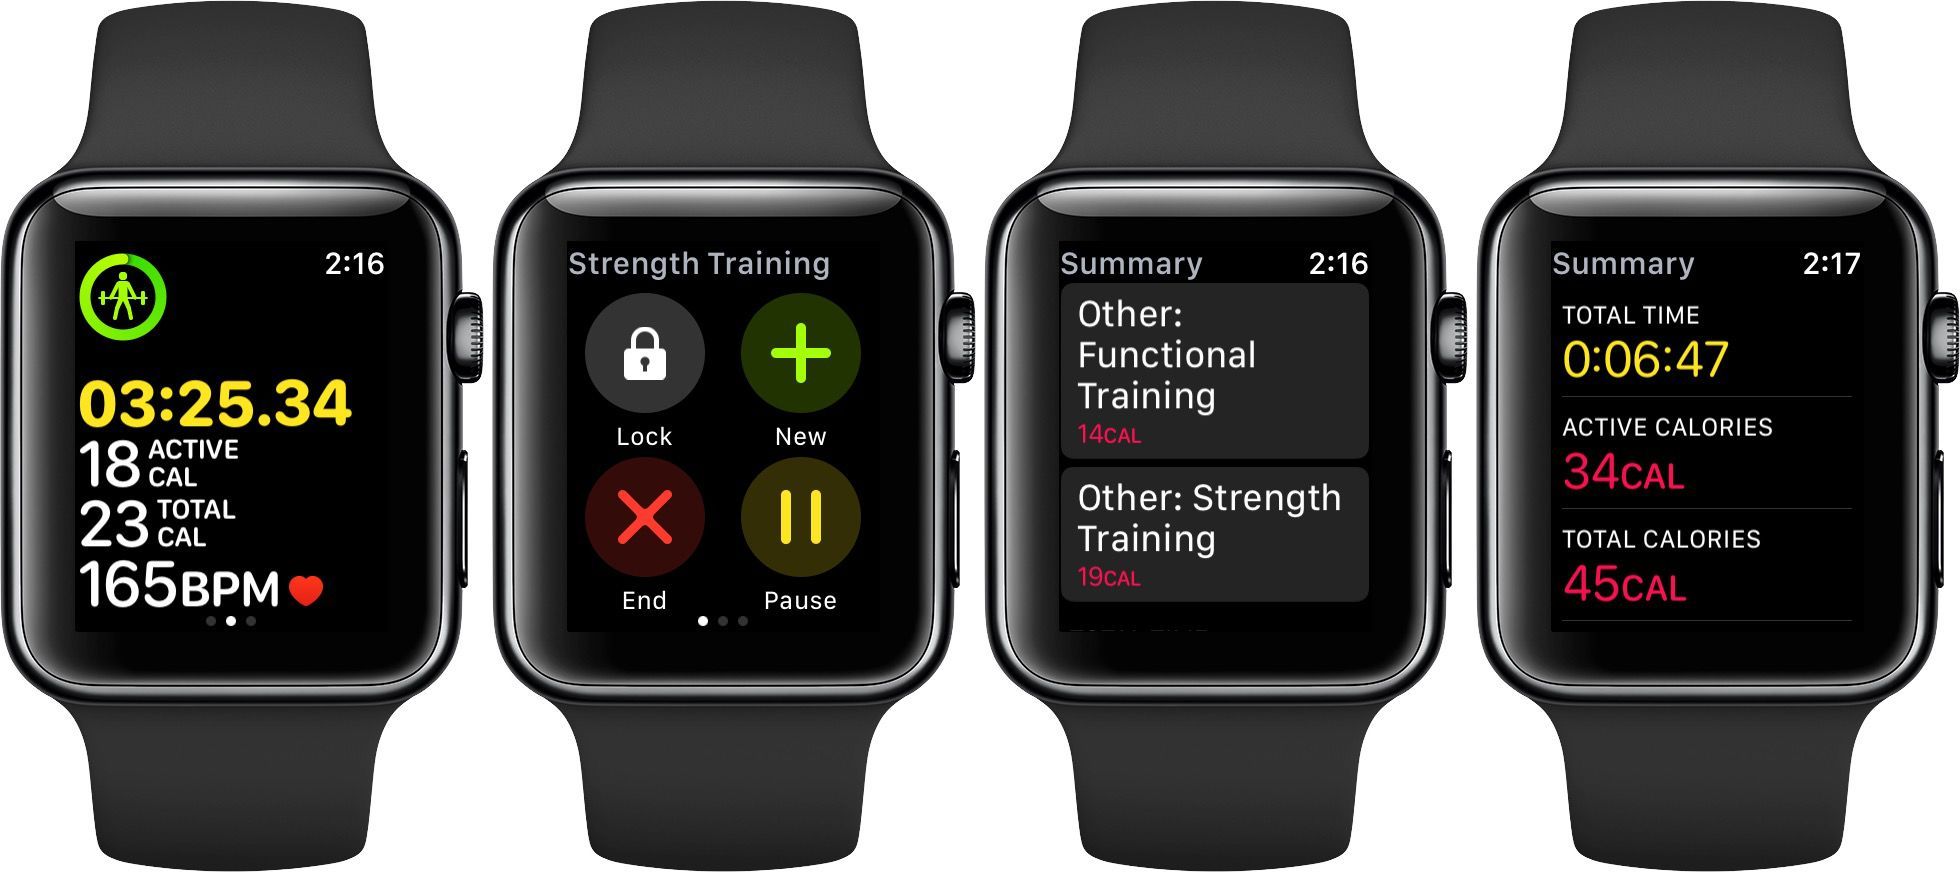 How to Track Back-to-back Workouts with Apple Watch?